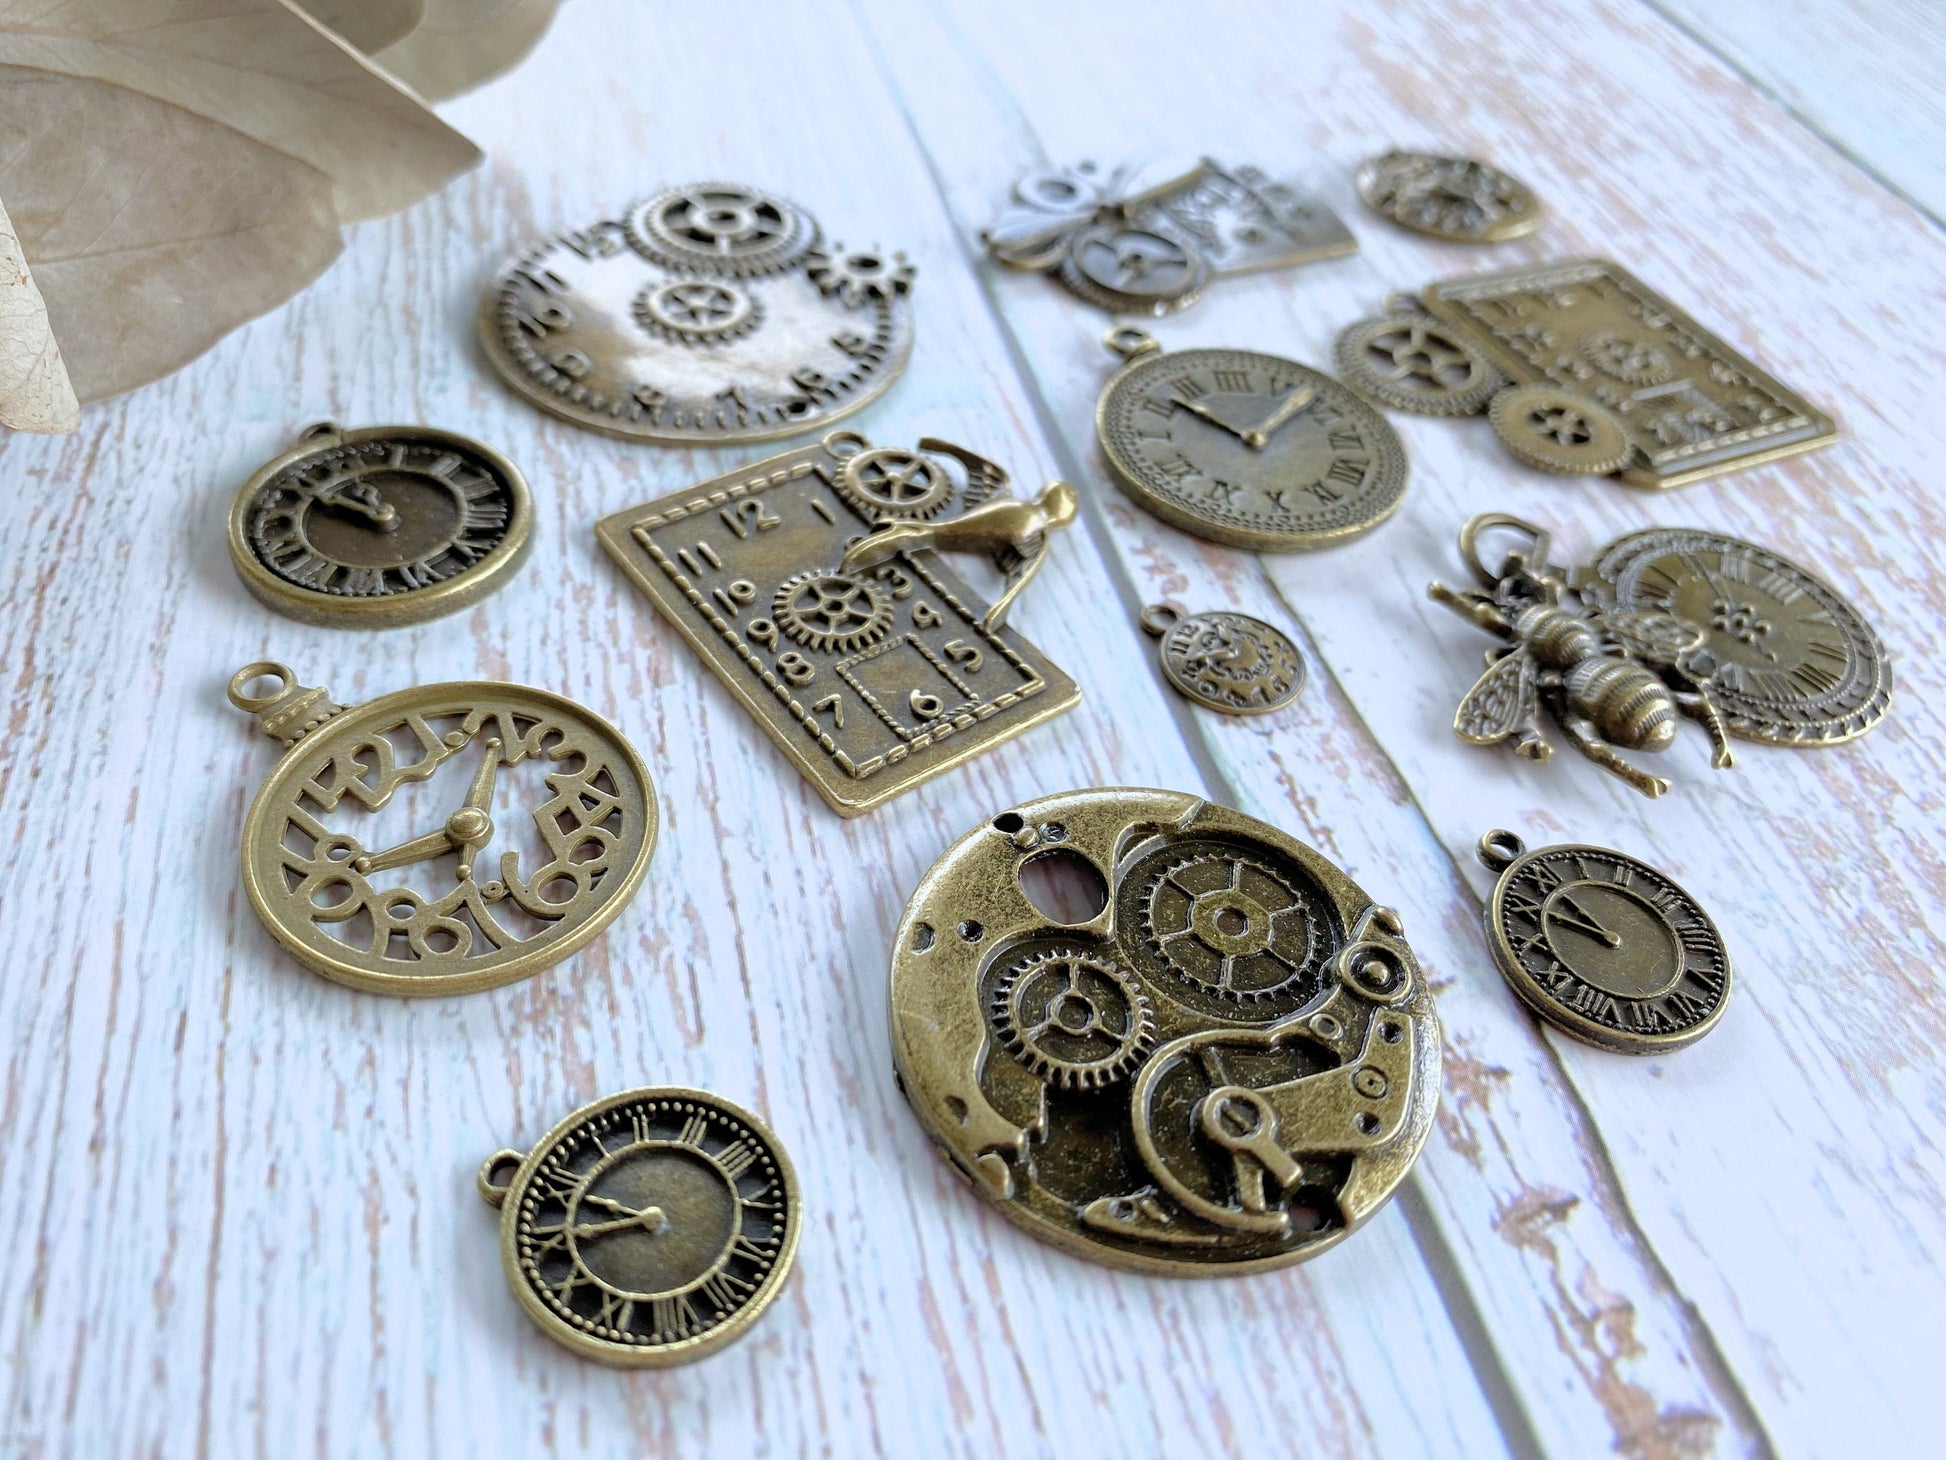 Charmed by Dragons Steampunk Watch Parts and Pieces - 1 oz - 250 Plus Pieces of Tiny Vintage Gears, Wheels, Hands, Crowns, Cogs and Stems for Jewelry and Crafts (1 oz